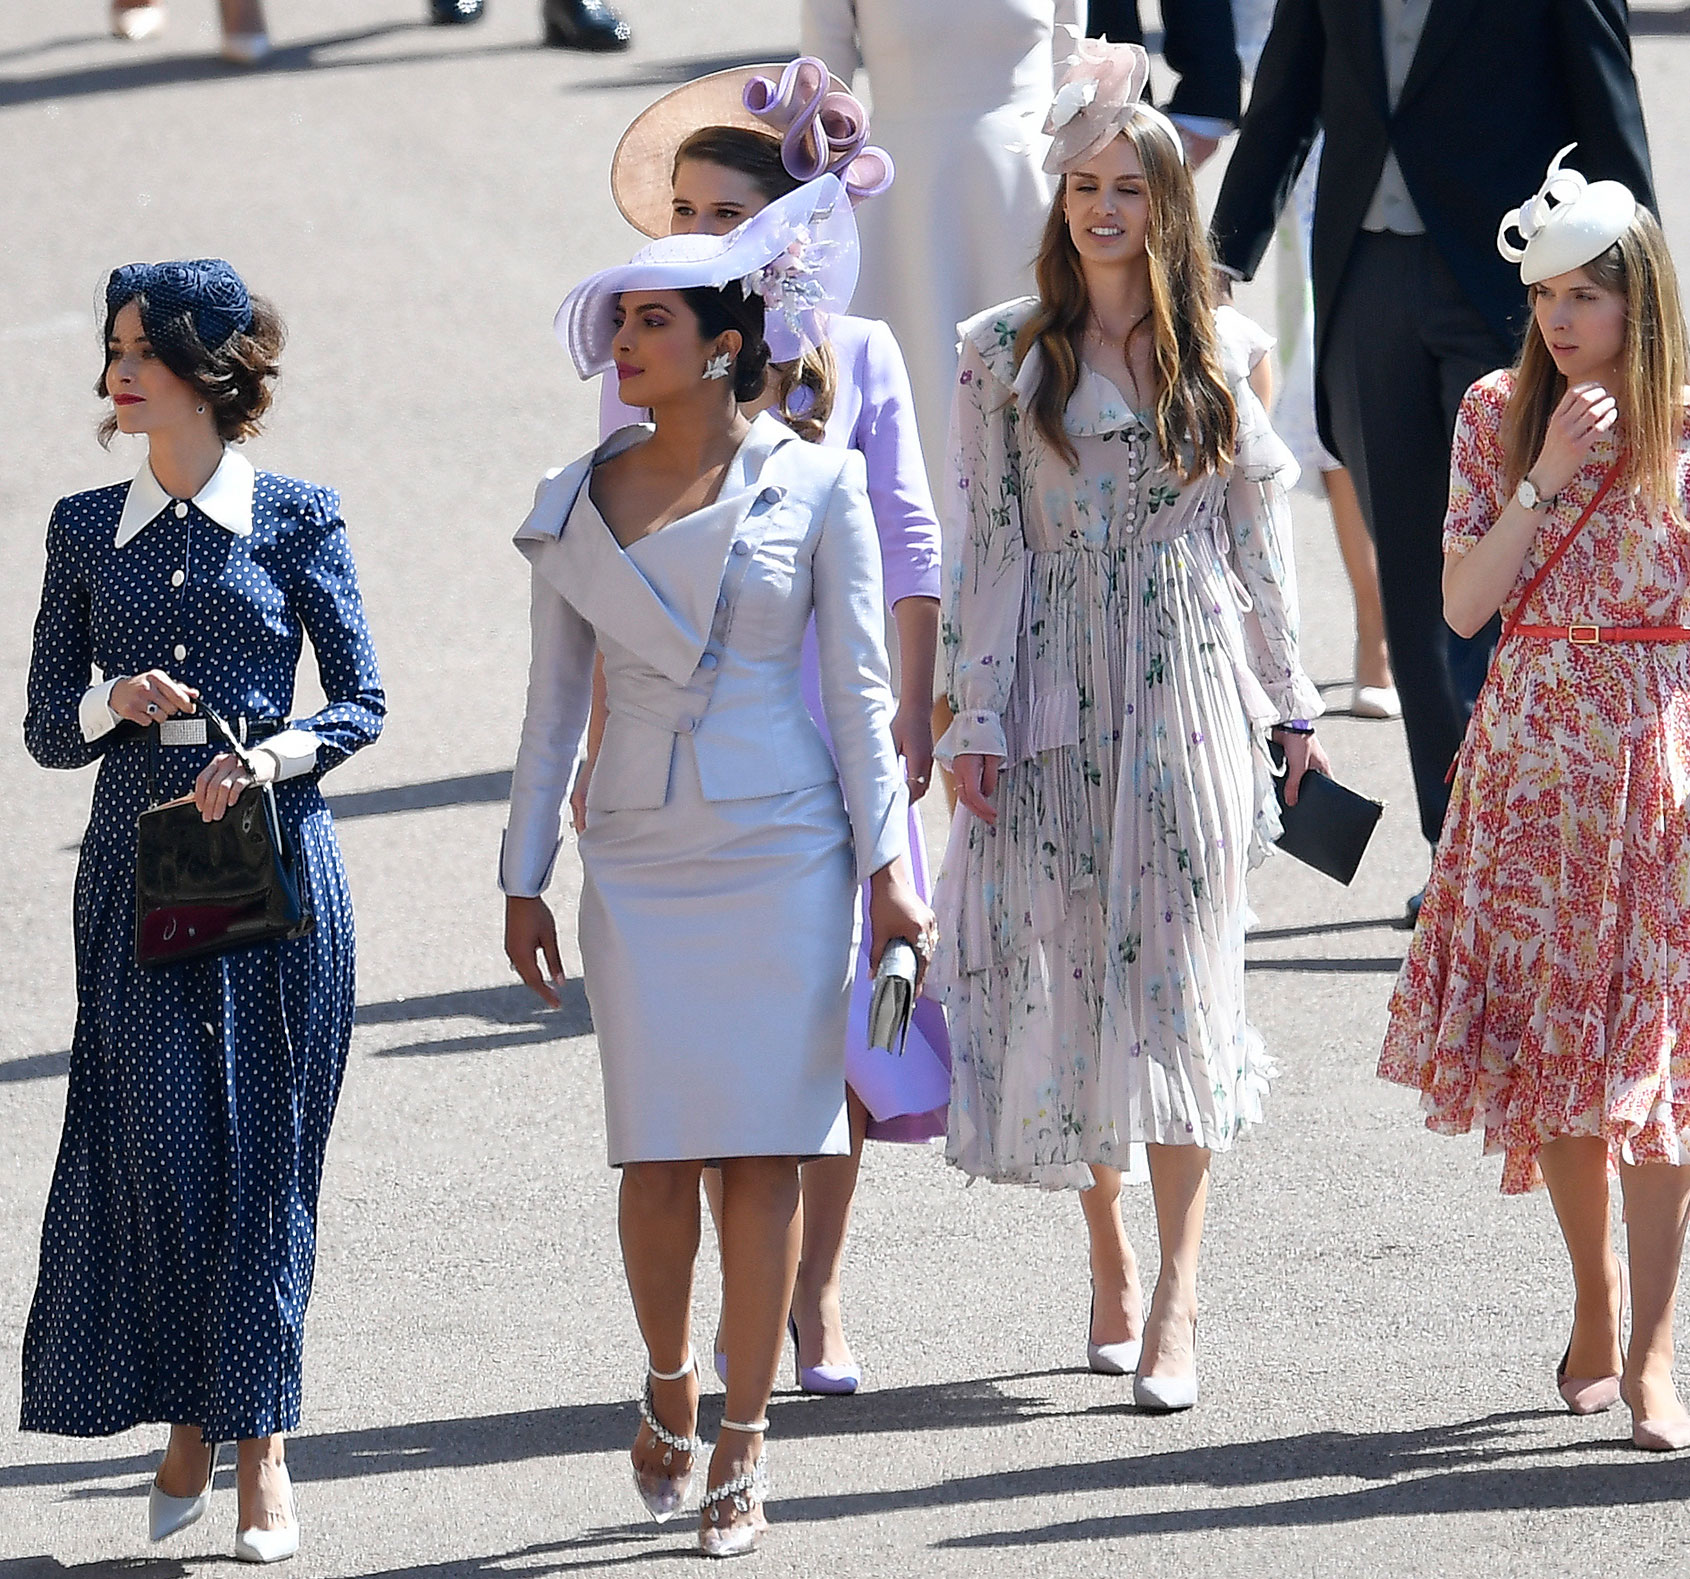 The Best Dressed Guests at the Royal Wedding